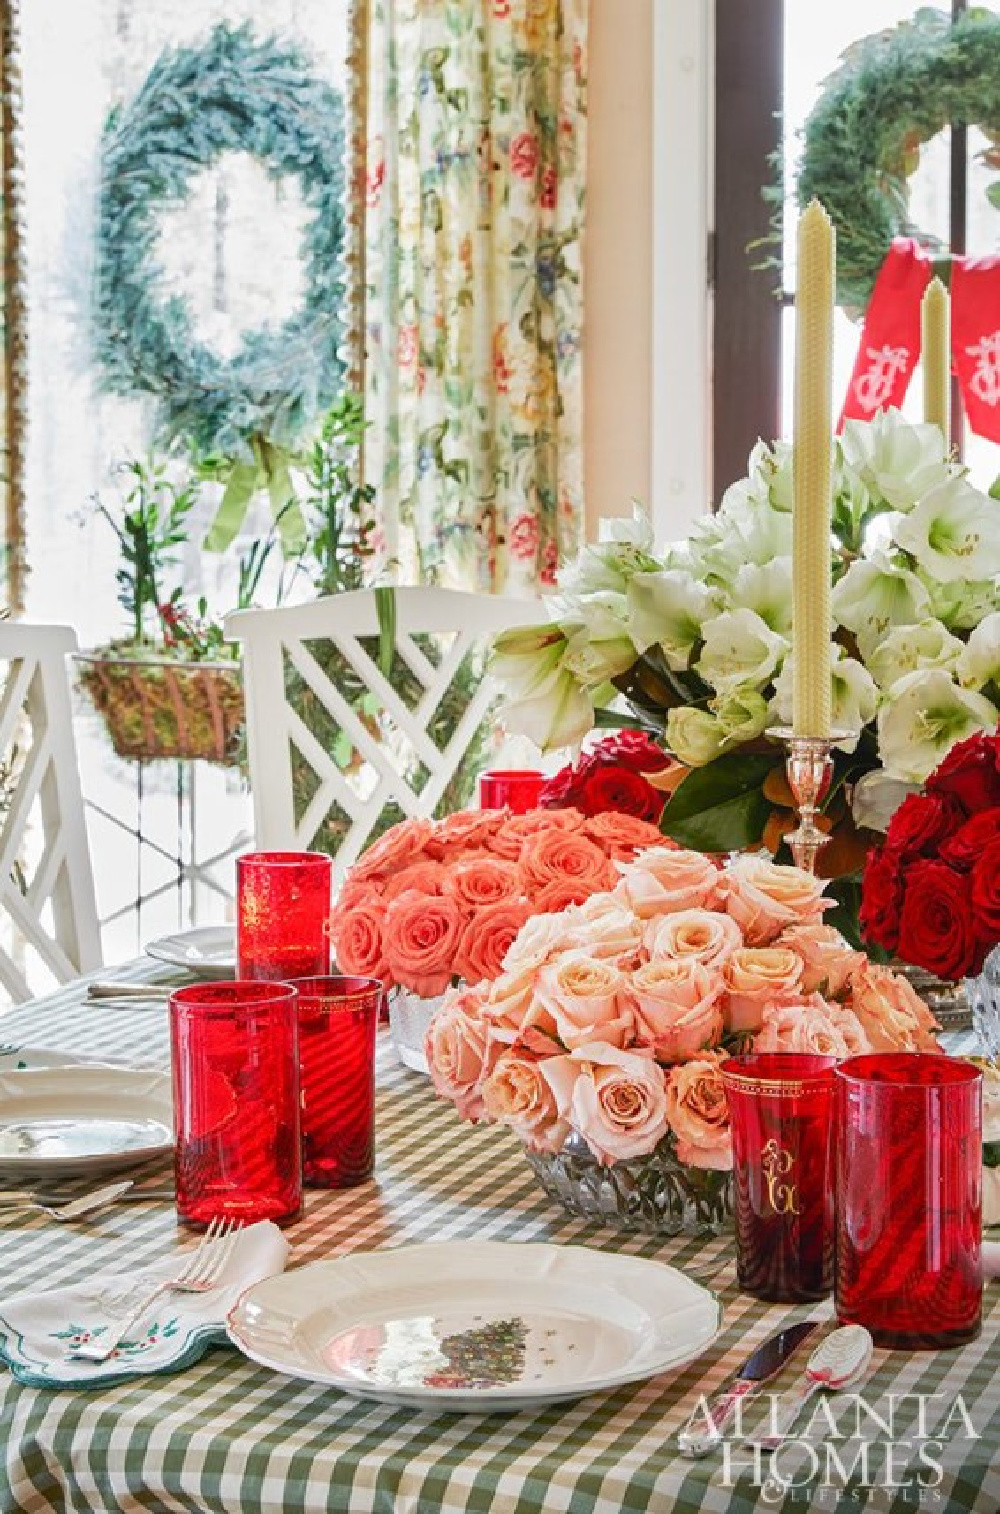 James Farmer designed Christmas tablescape at his Farmdale cottage in Georgia with florals by Mary Cox Brown of Marigold Designs in Birmingham - Photo: Atlanta Homes. #southernchristmas #holidaytablescape #christmasflorals